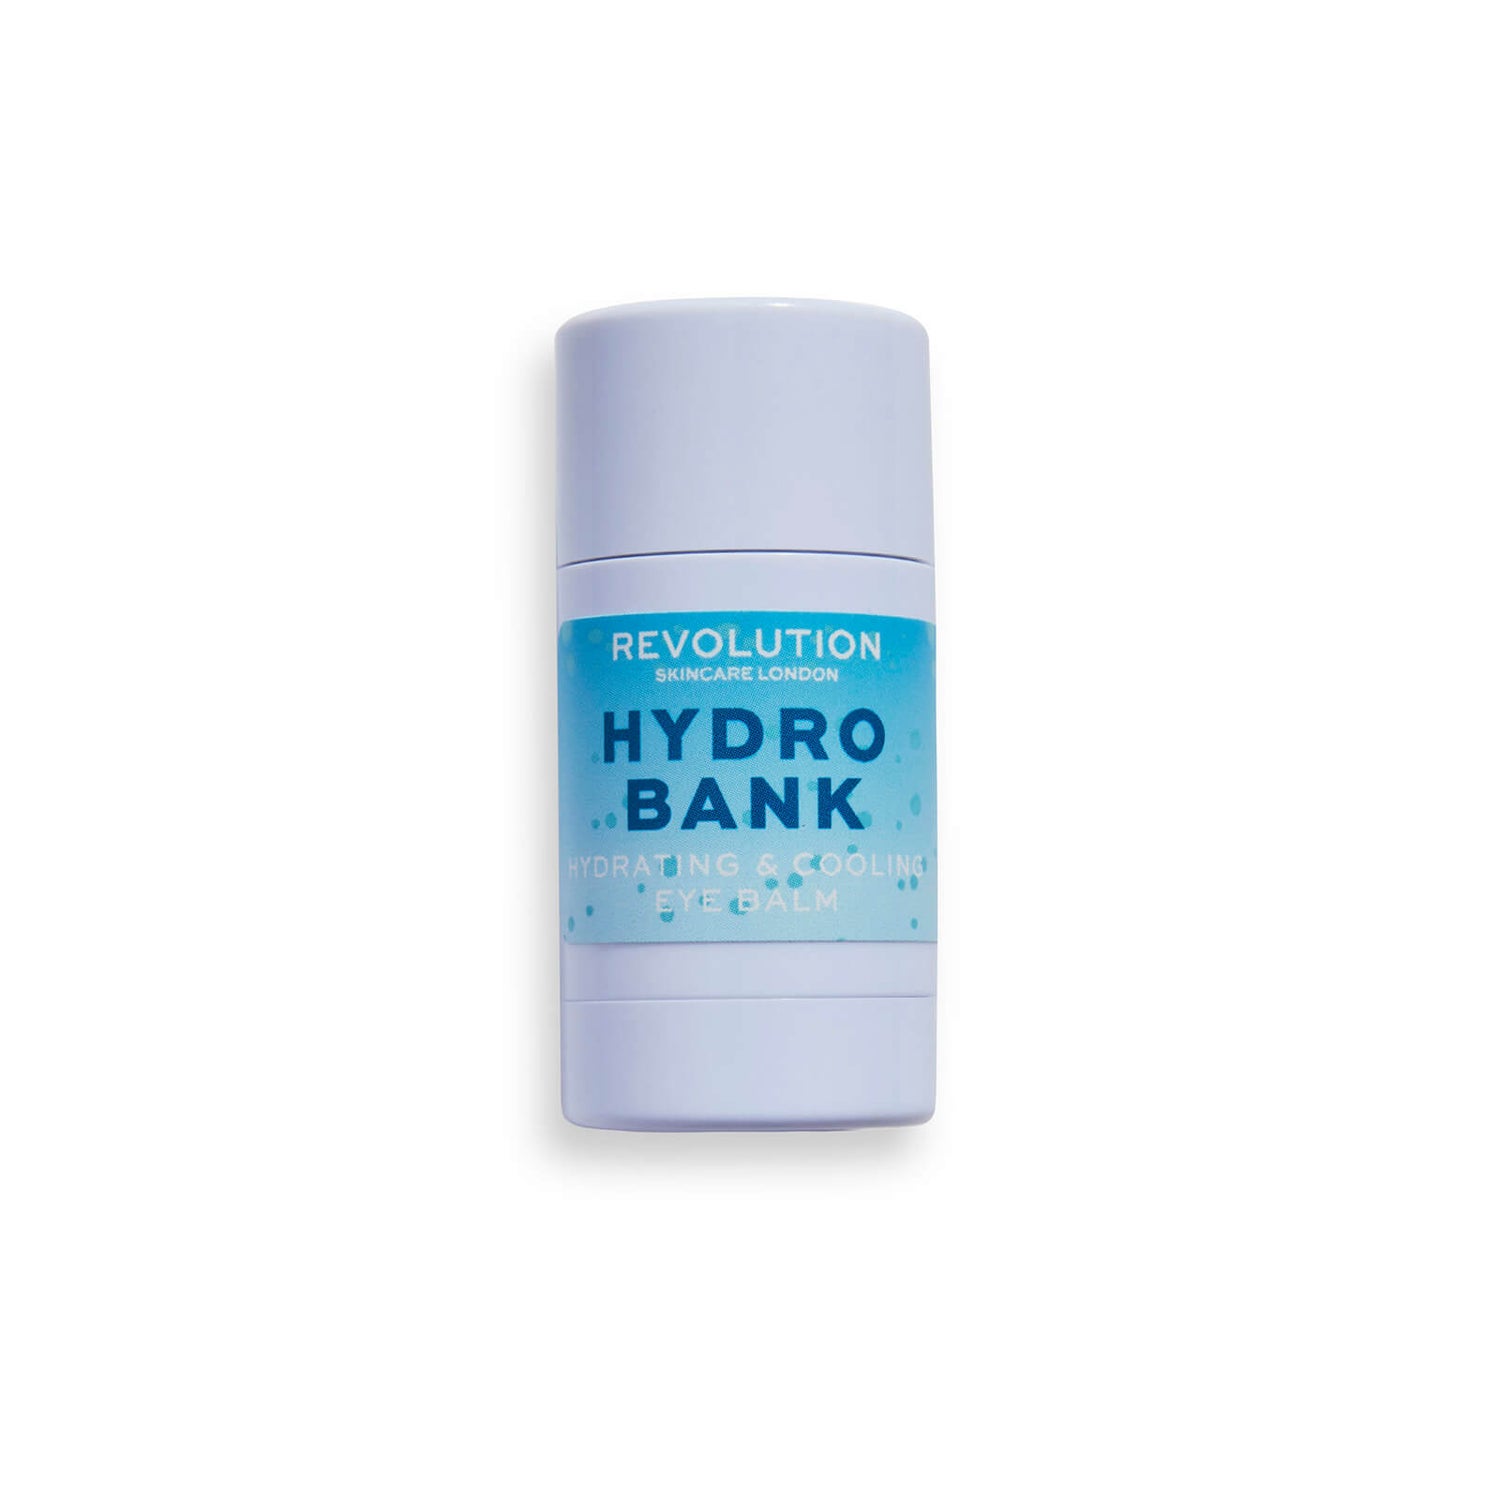 Revolution Skincare Hydro Bank Hydrating & Cooling眼霜